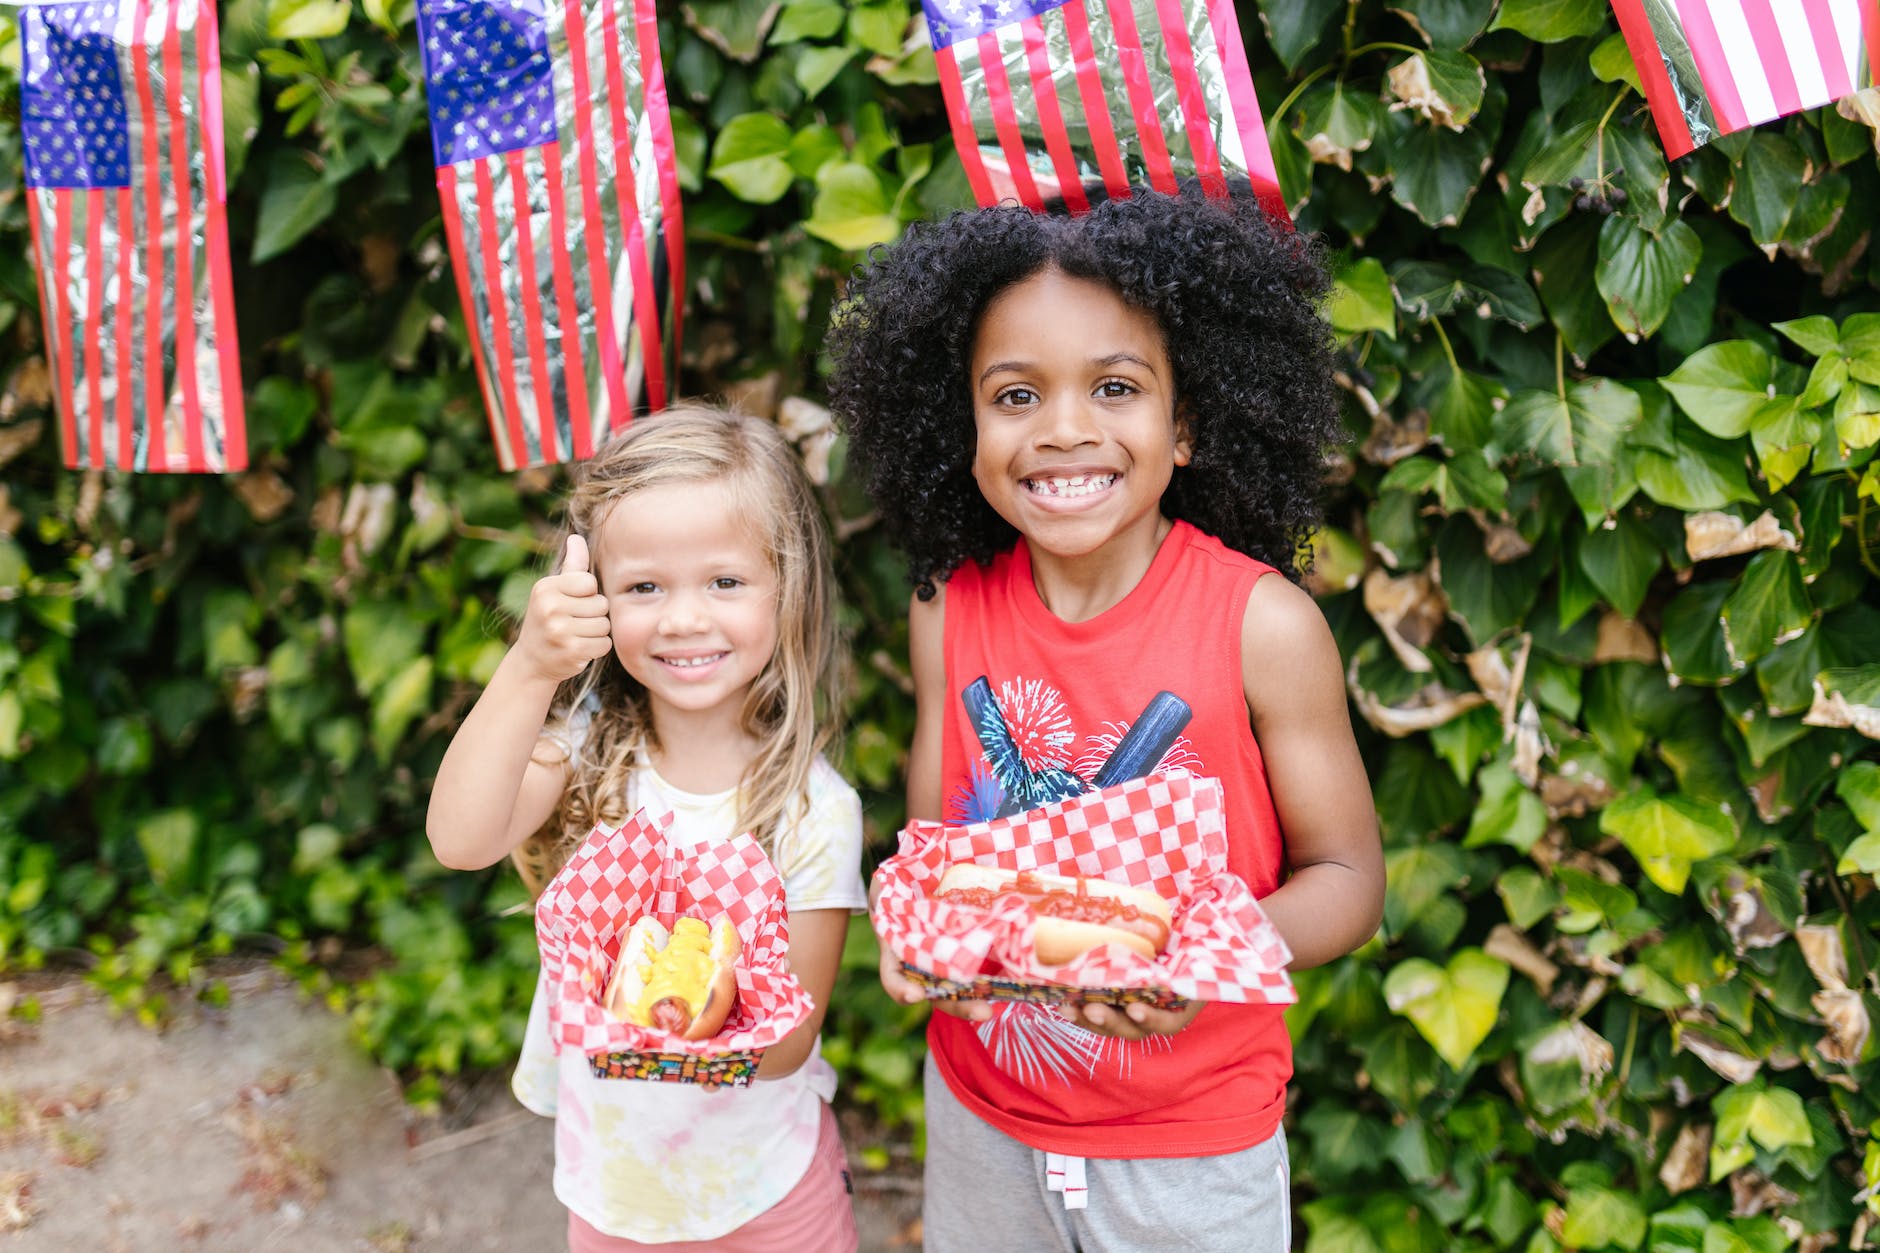 a young girl and boy smiling while holding hot dog sandwiches